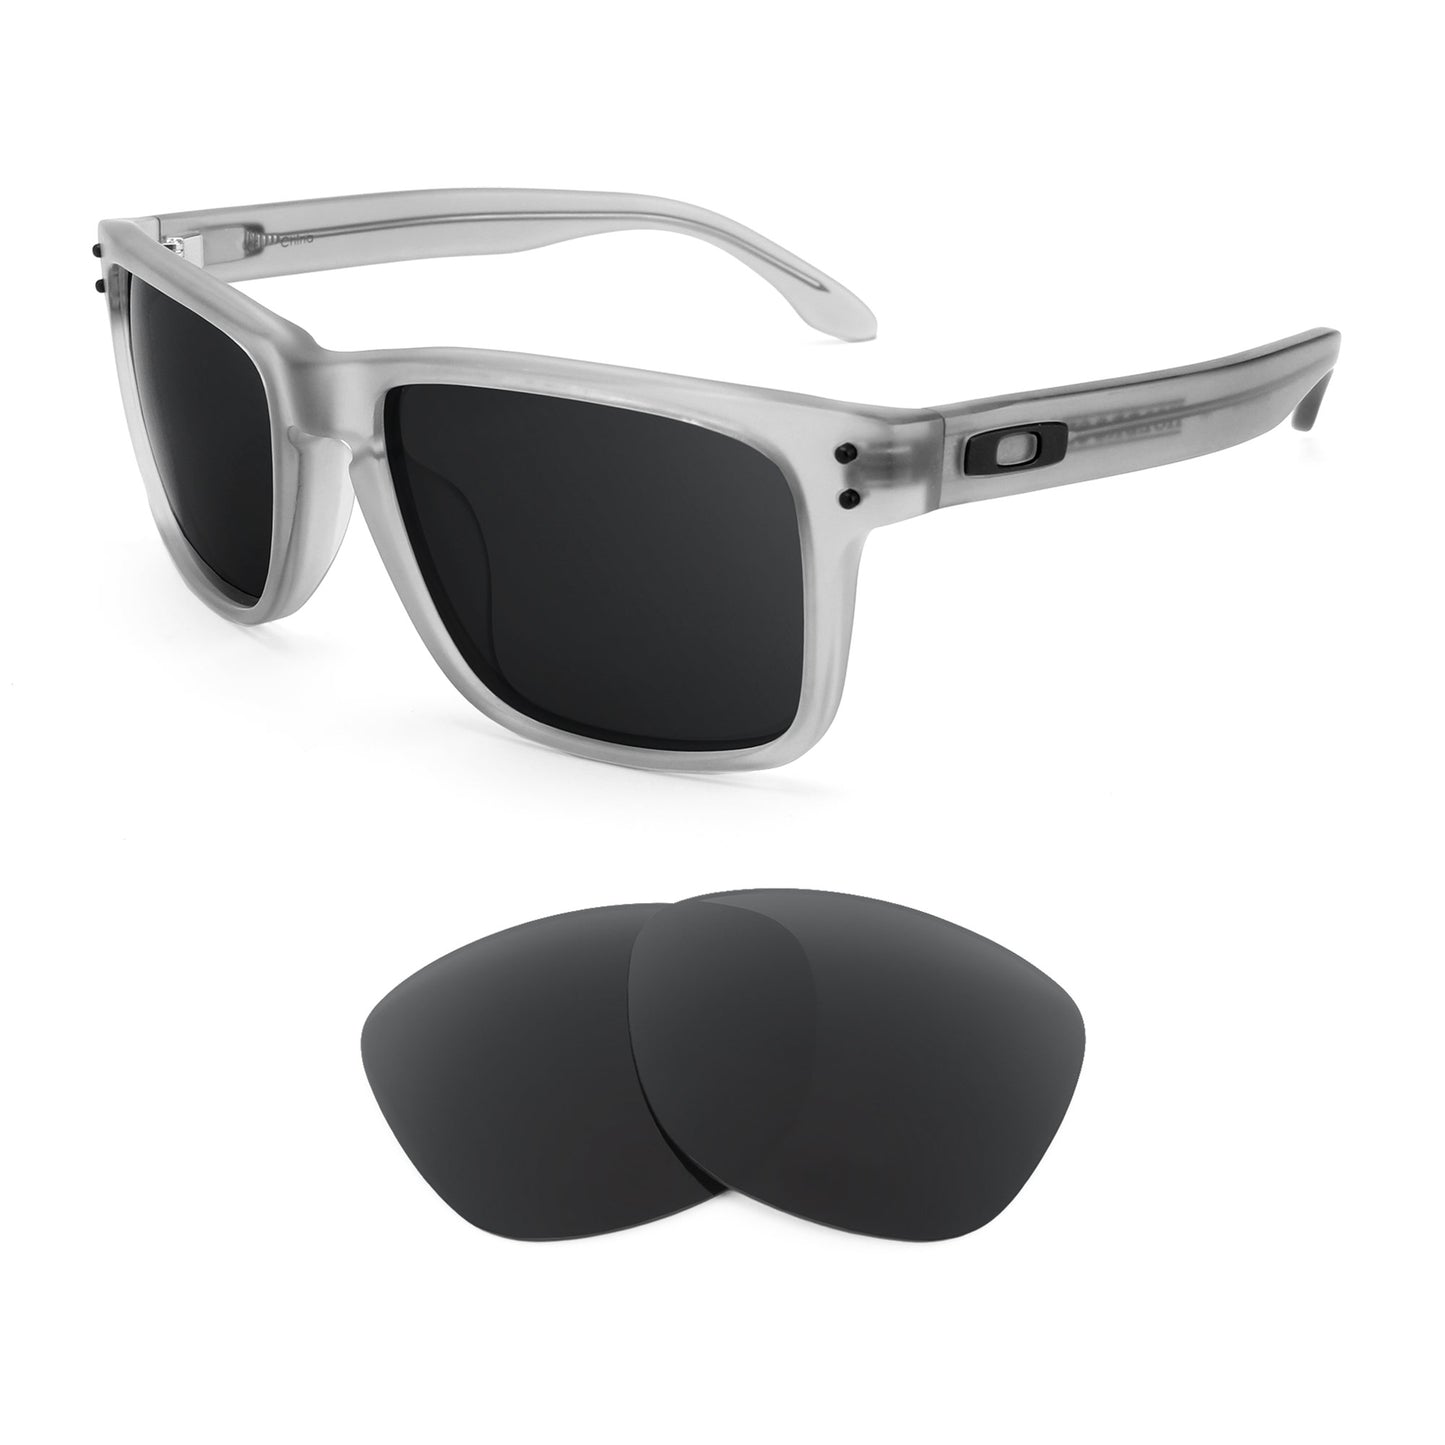 Oakley Holbrook LX sunglasses with replacement lenses